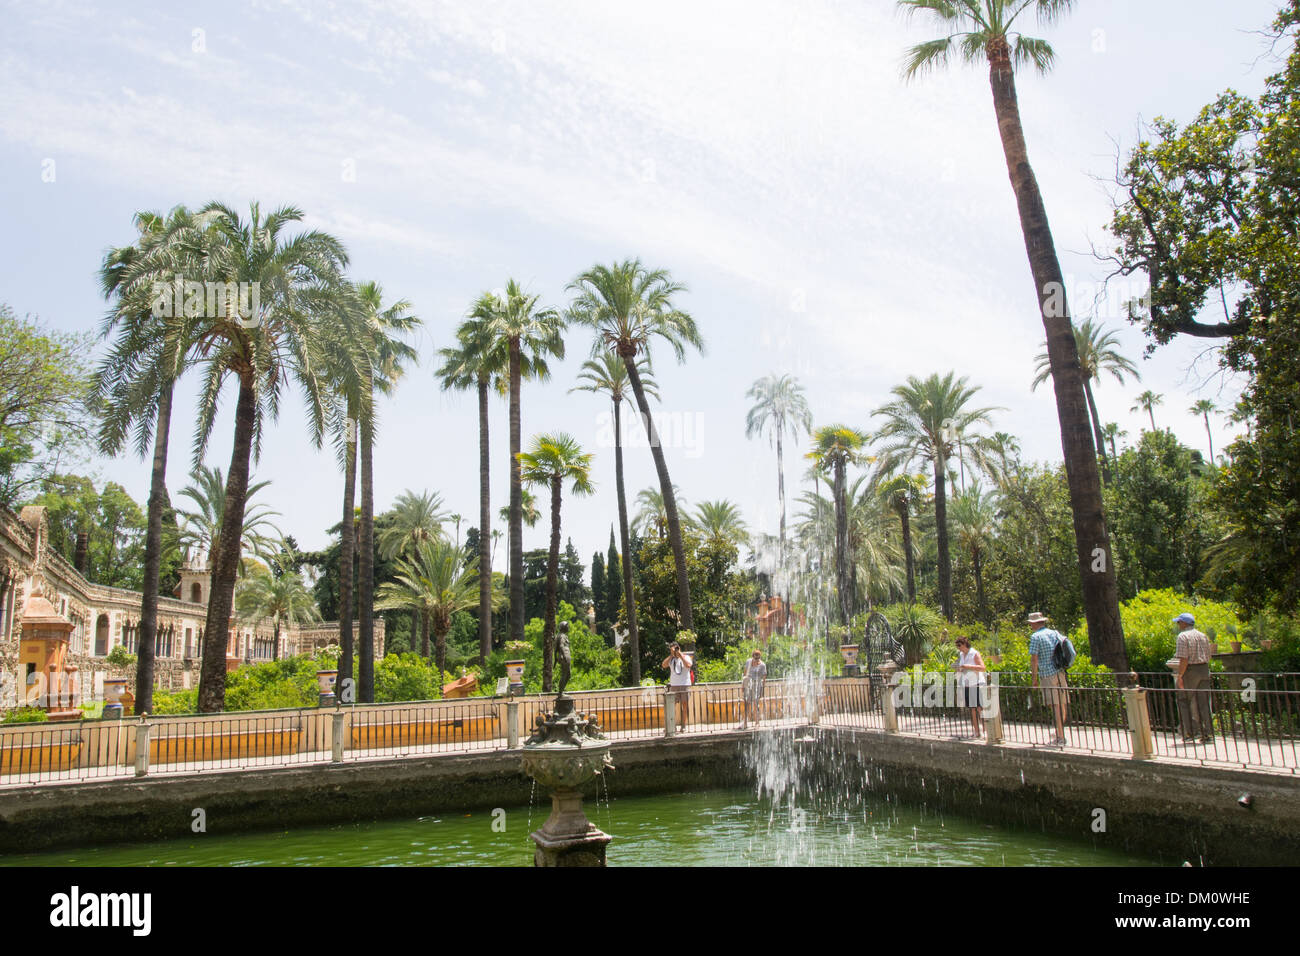 Gardens of The Alcazar (Royal Palace), Seville, Andalucia, Spain. The 'Water Gardens of Dorne' in Game of Thrones. Stock Photo